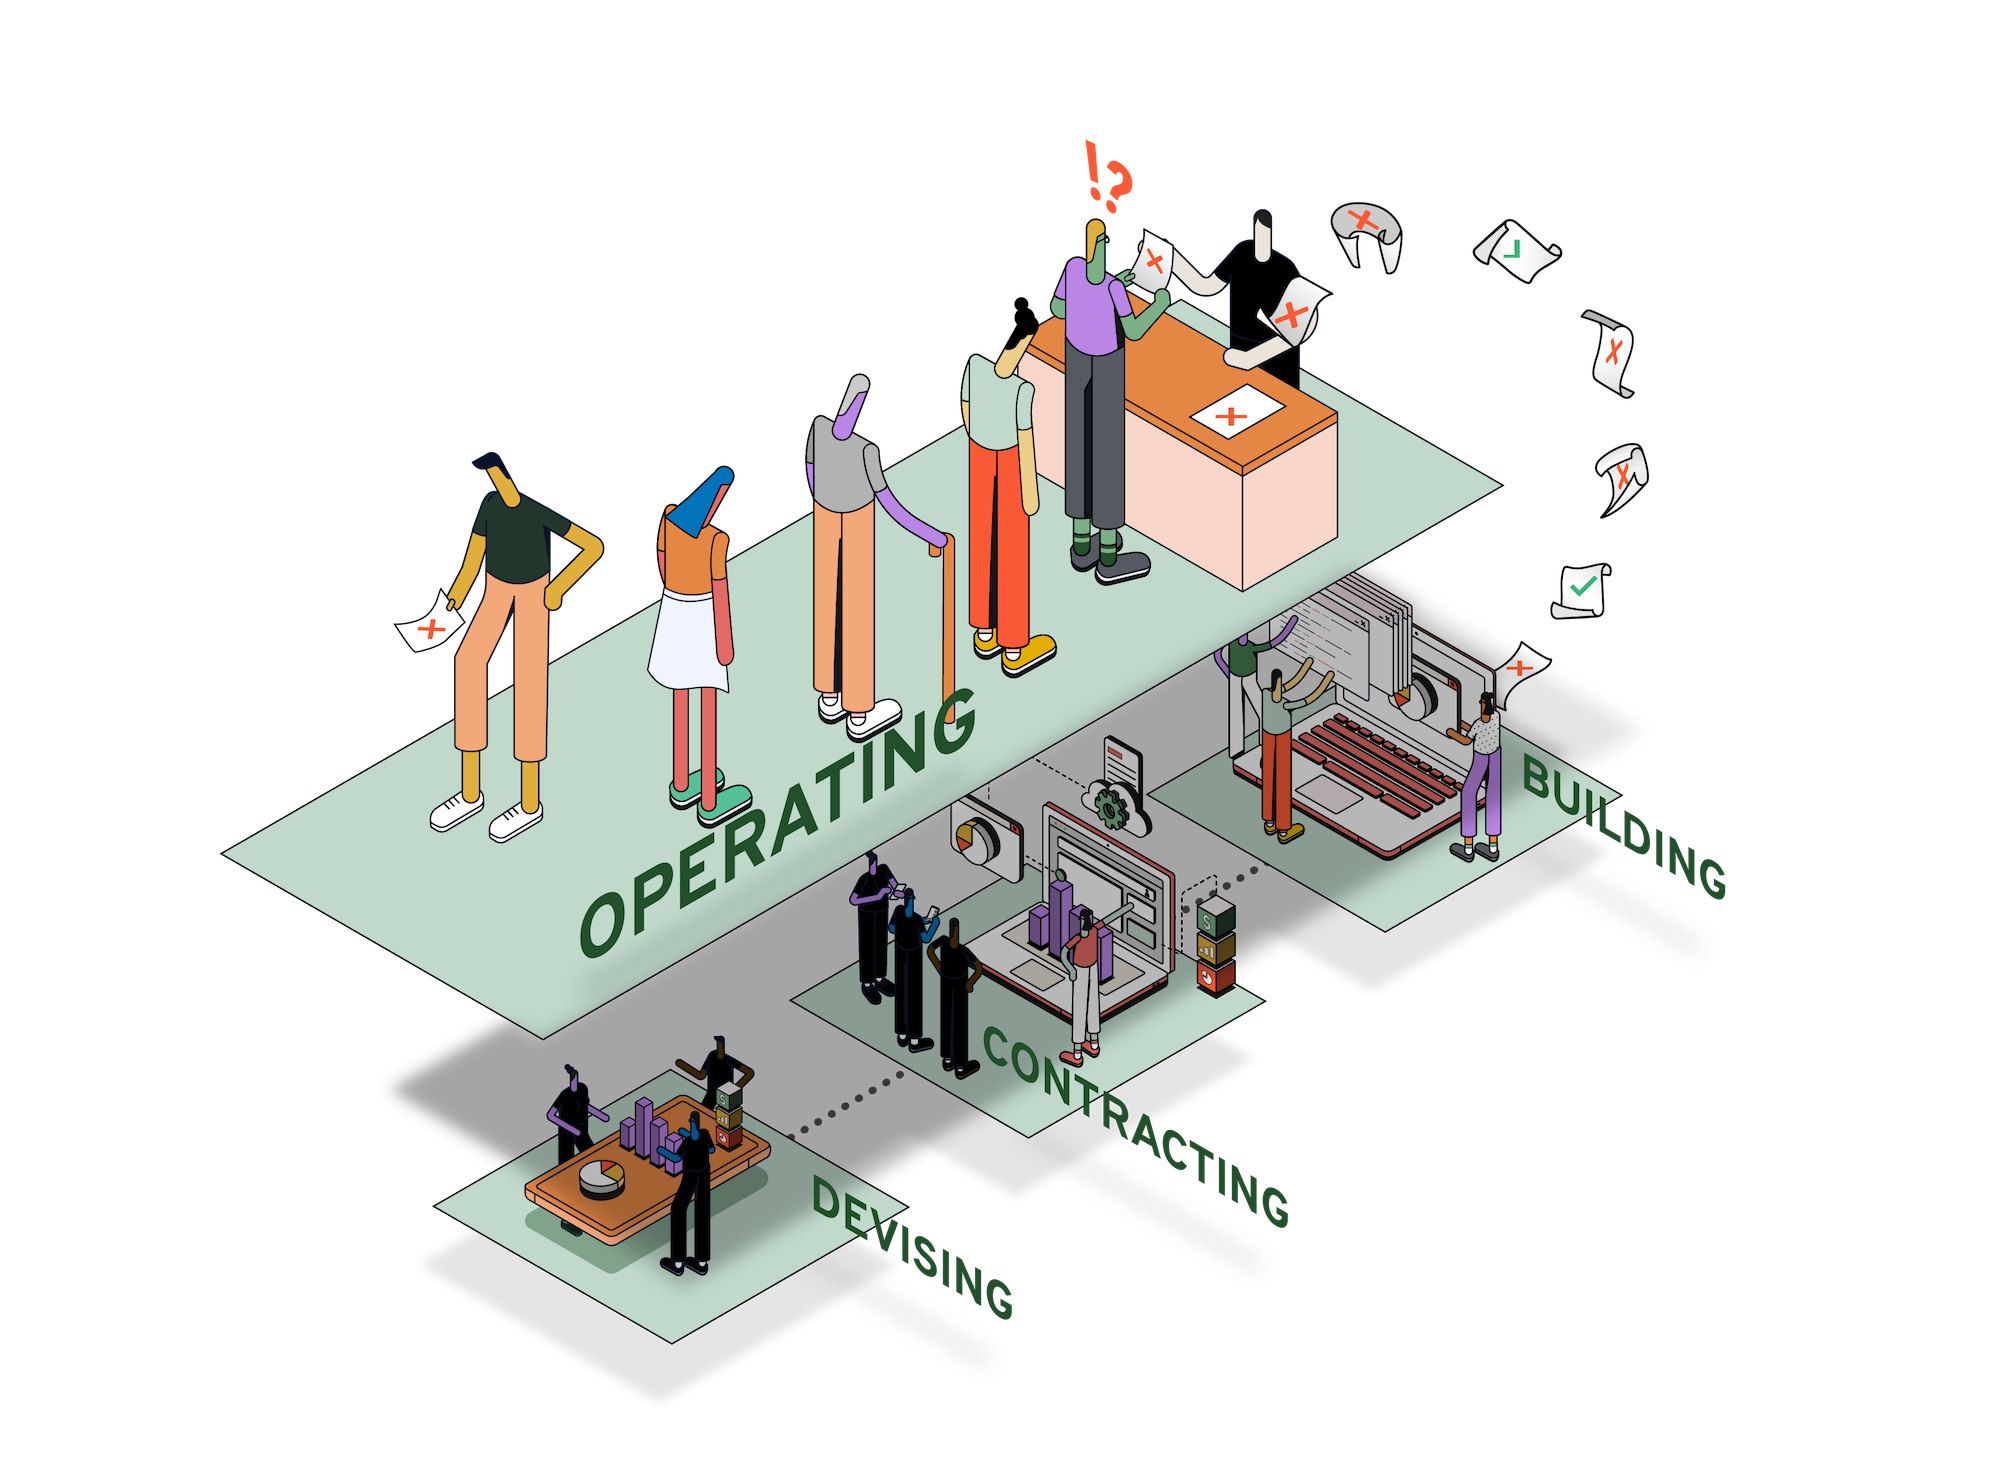 An isometric depiction of the lifecycle phases of benefits tech: devising, contracting, building, and operating. 